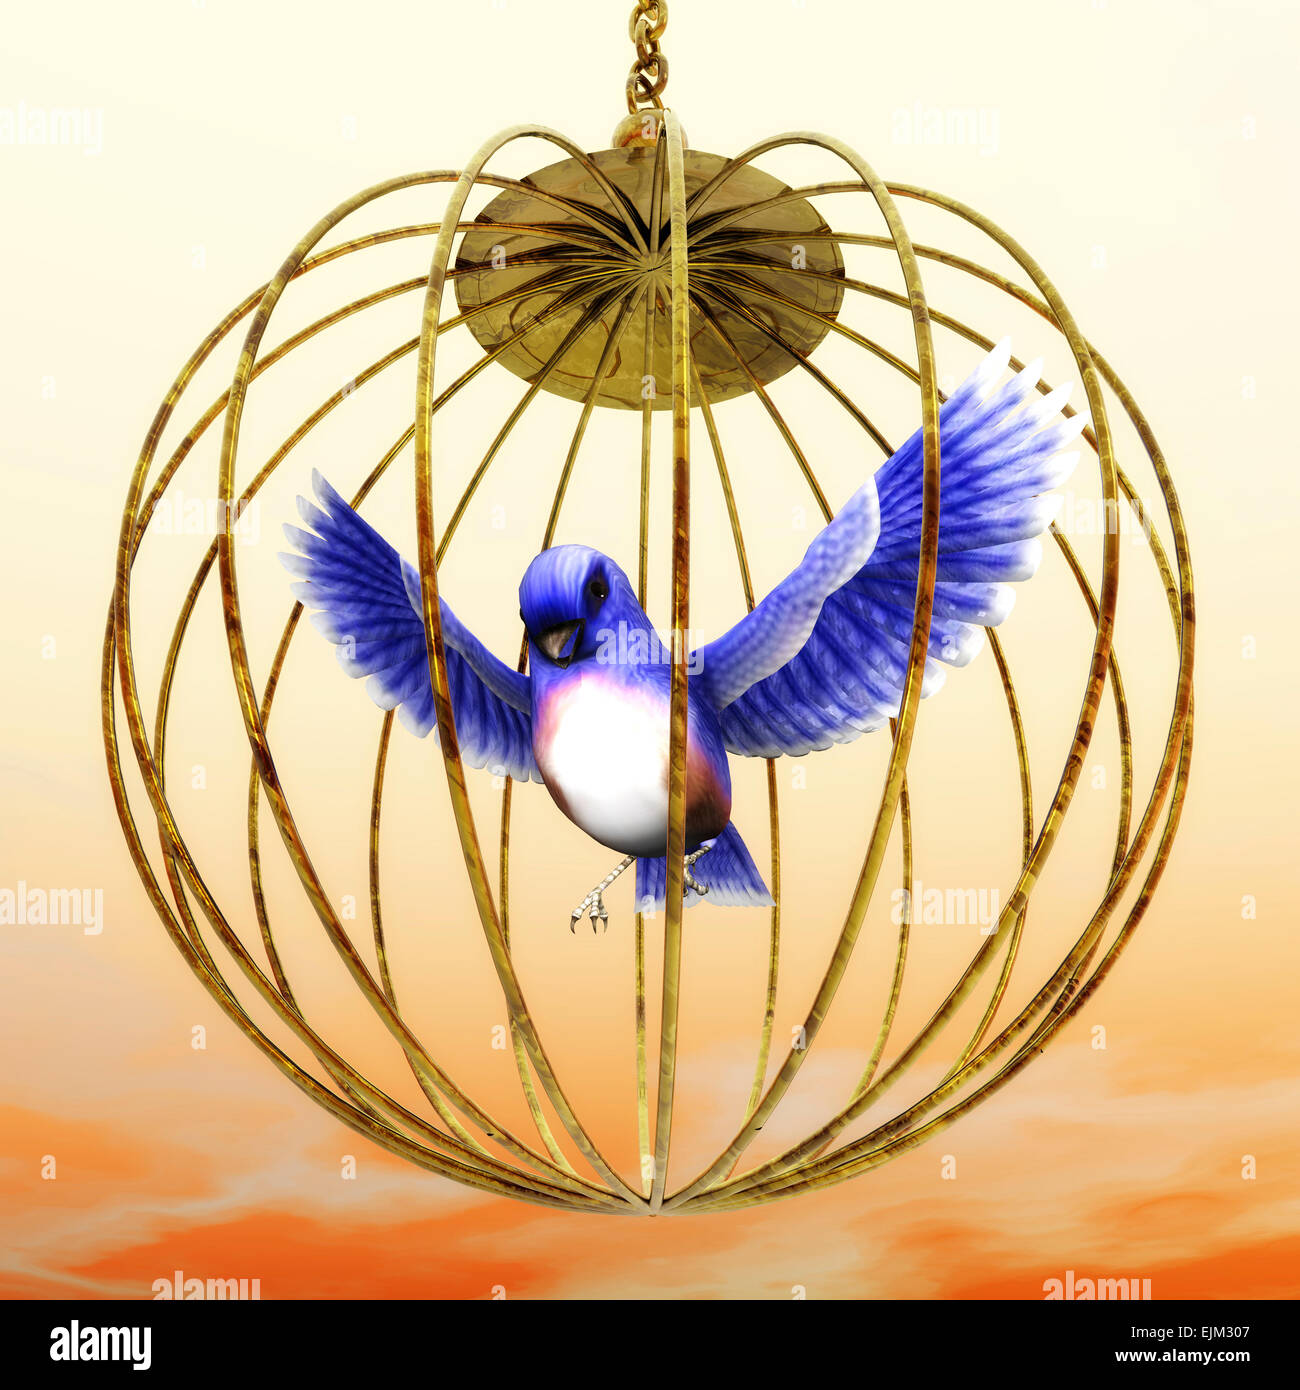 Digital Illustration of a golden Cage Stock Photo